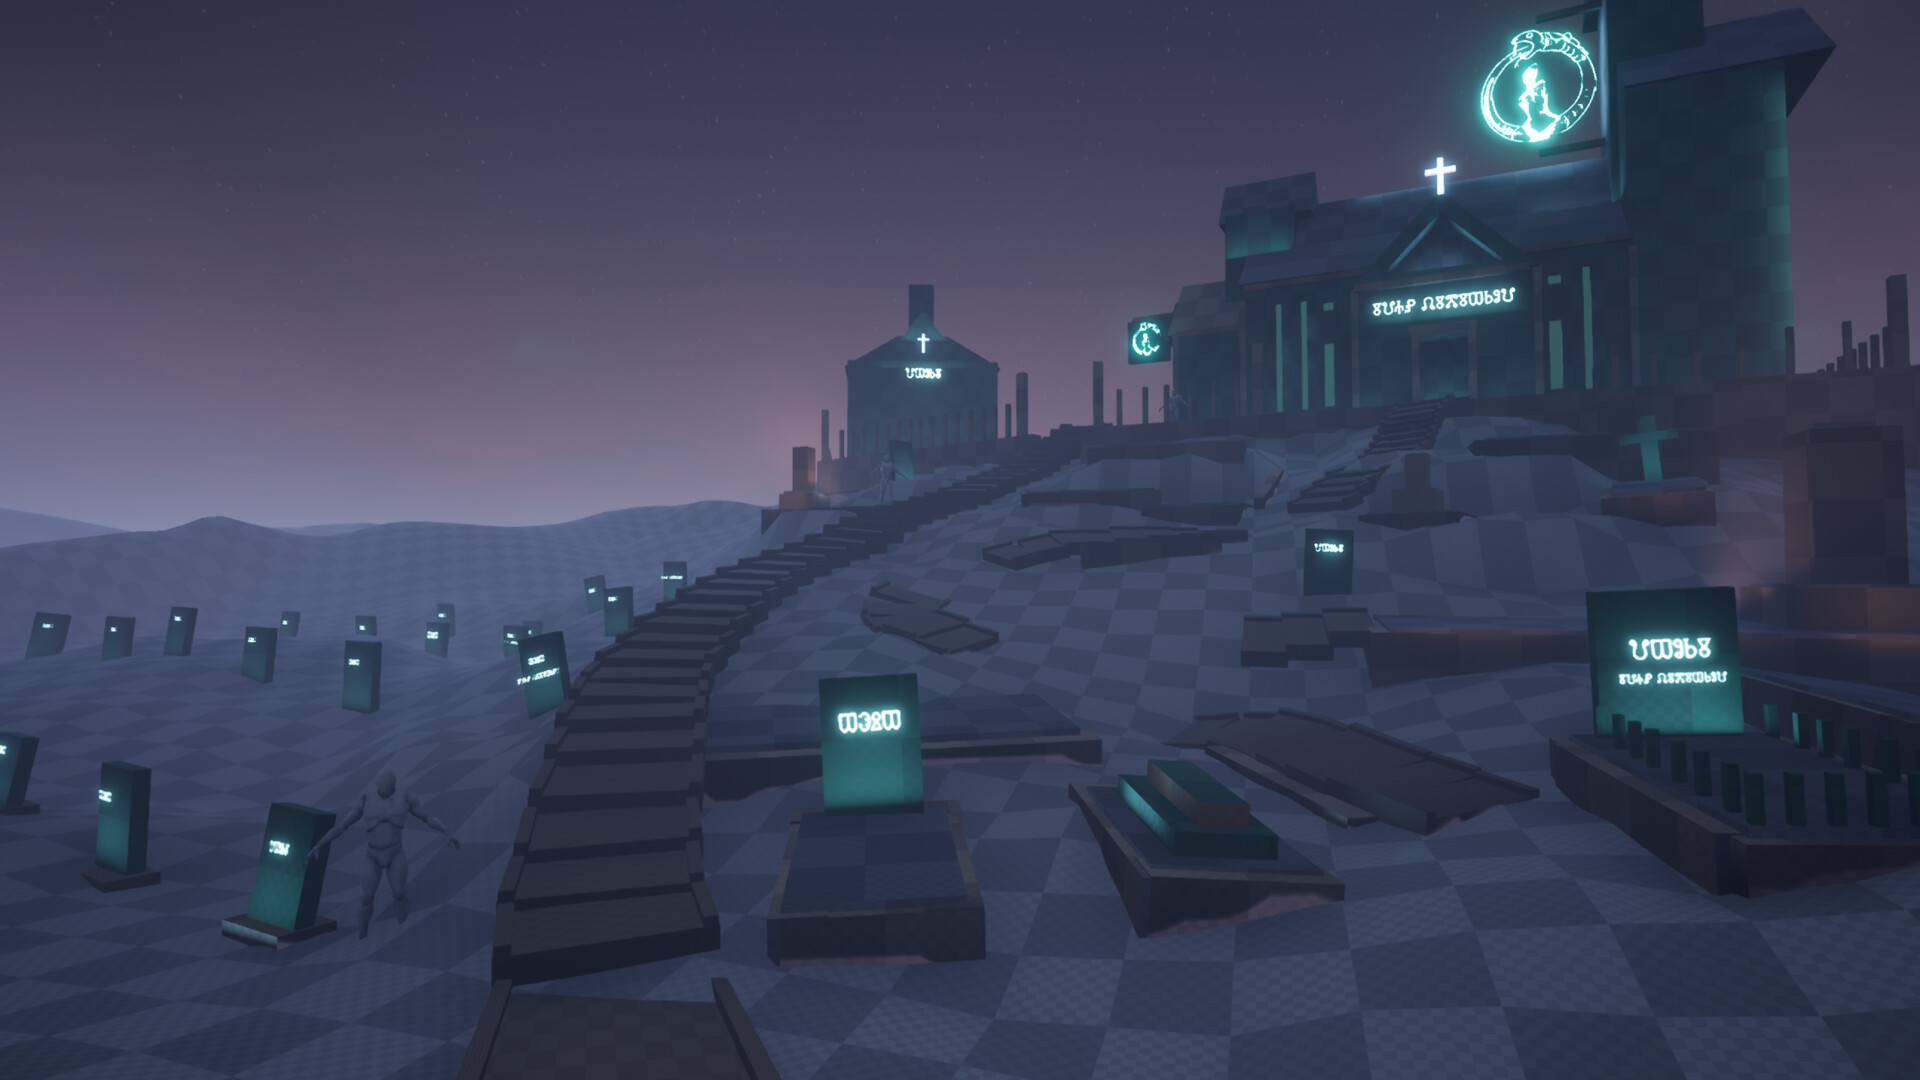 Progress screenshot from UE4. Showcases the previous placeholder hill and chapel on it. Now everything has progressed further and there are neon gravestones scattered around too.